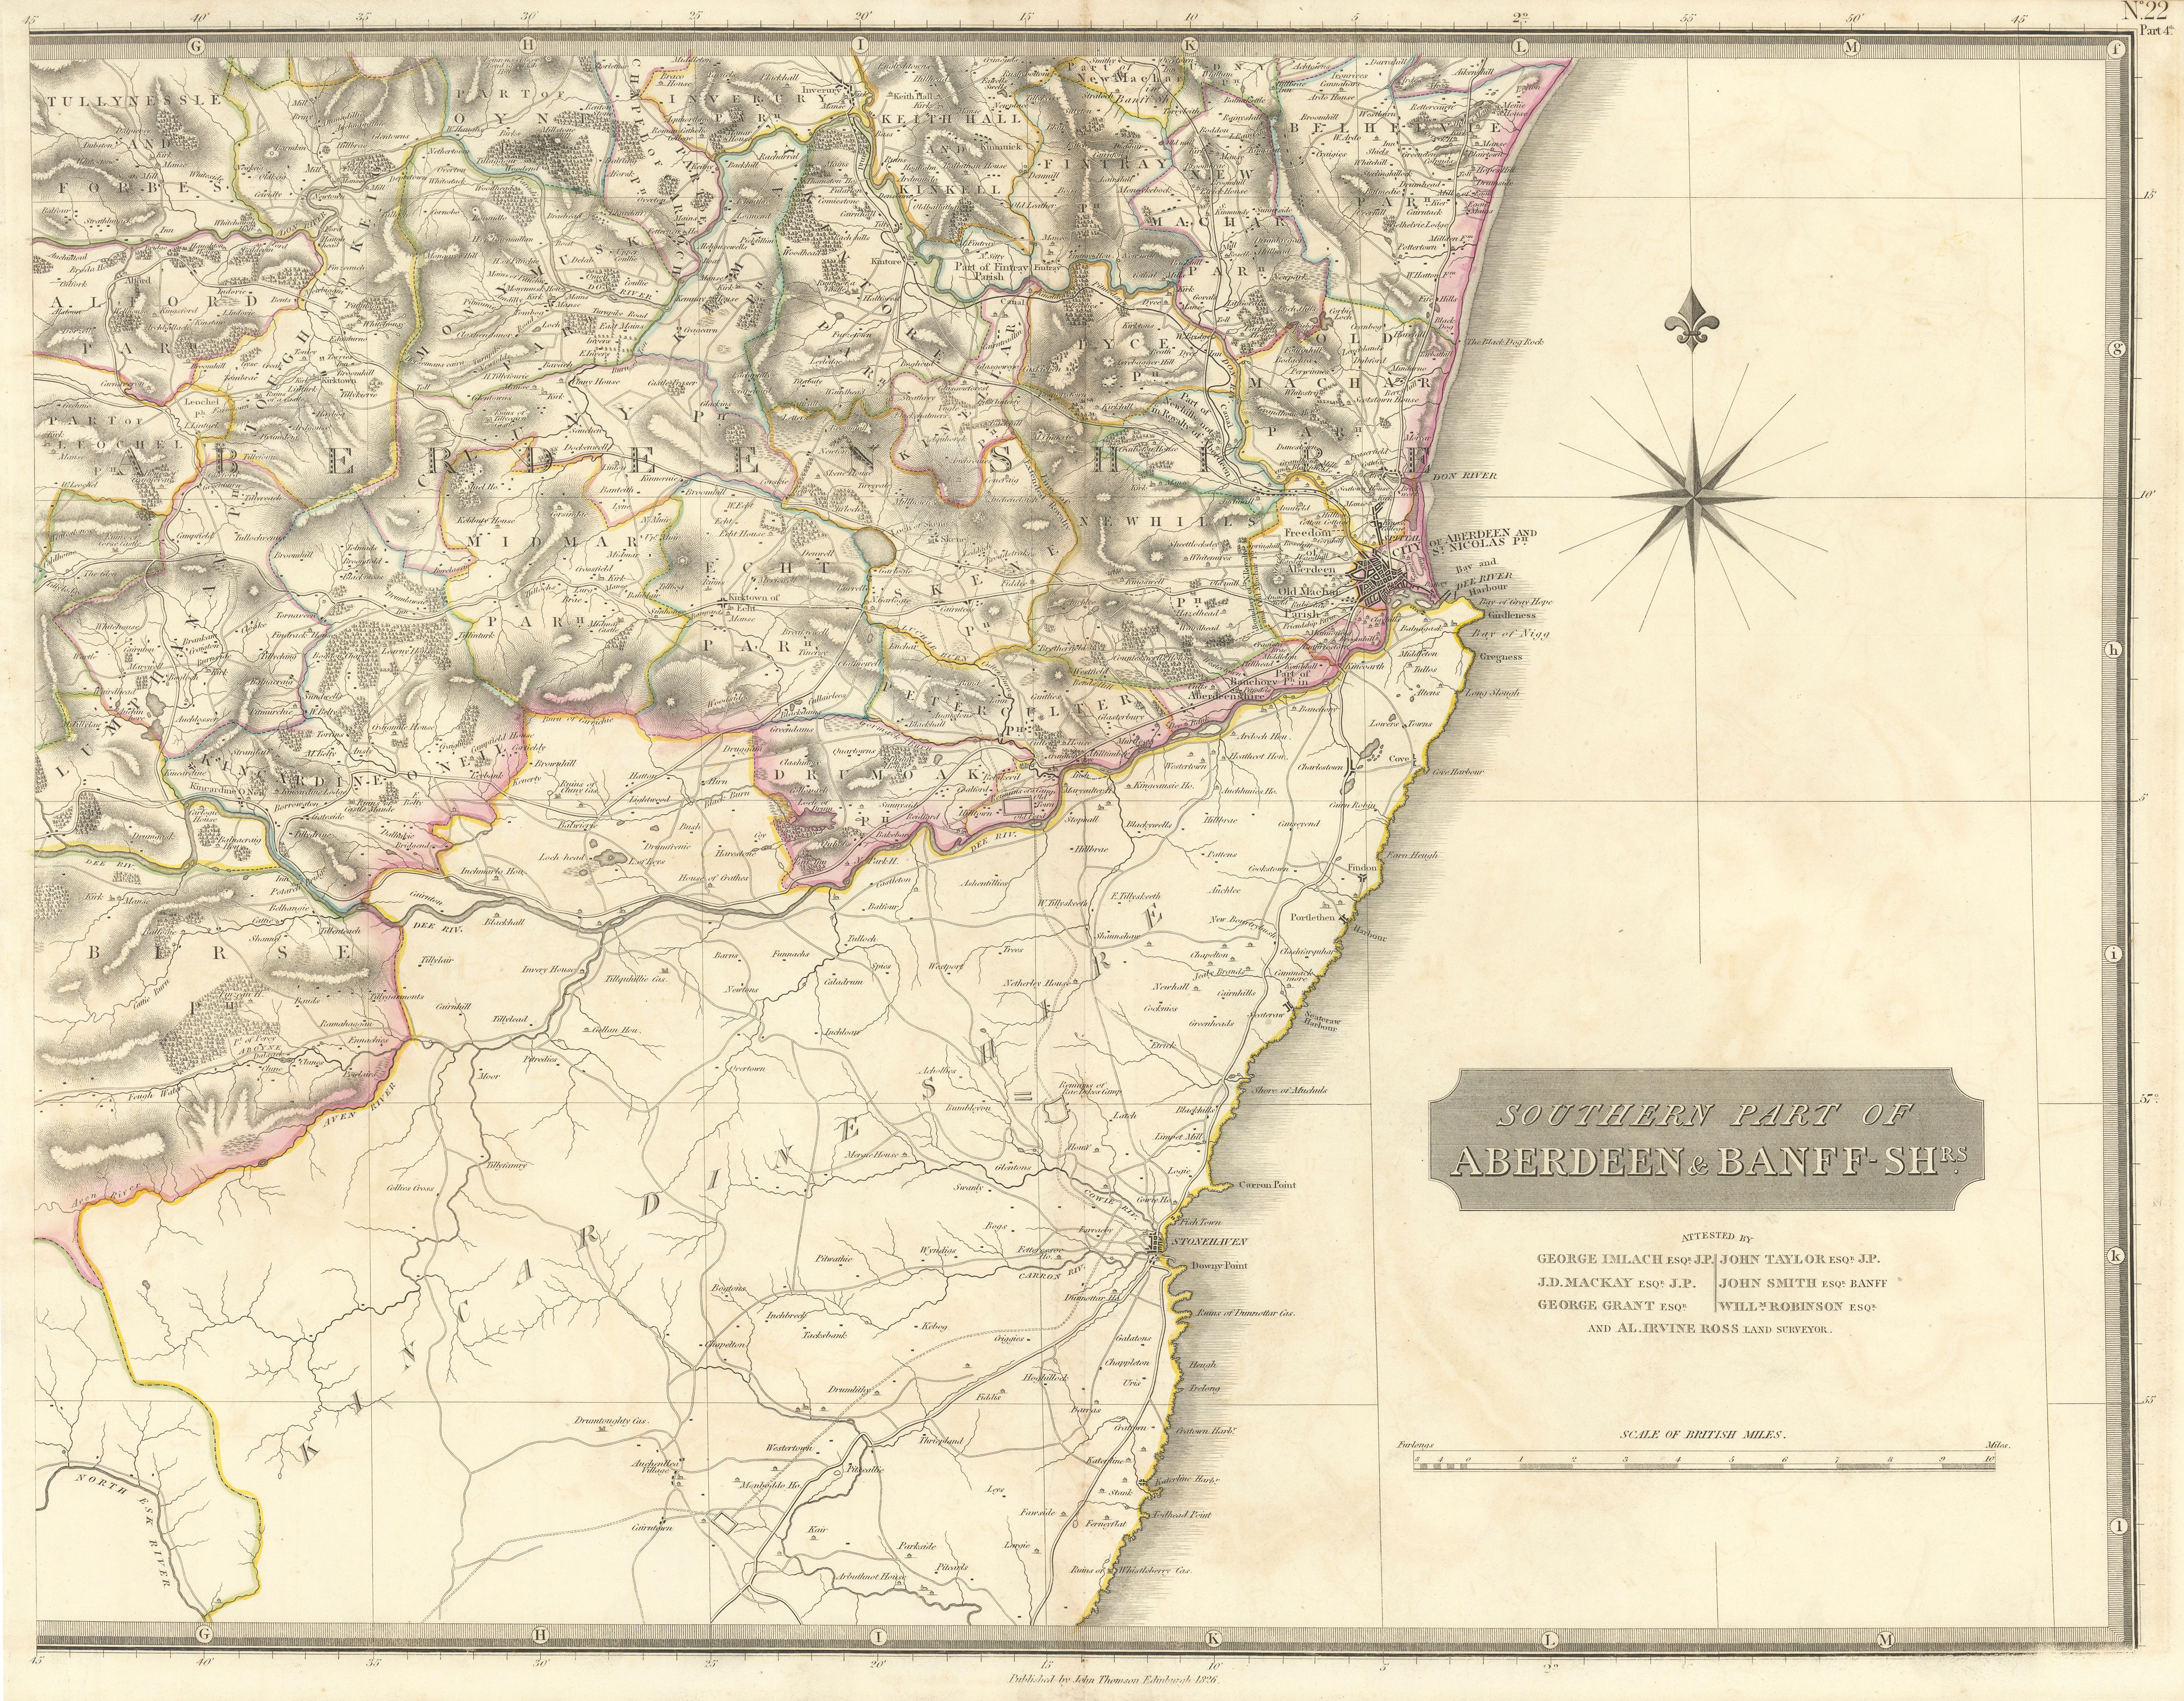 Associate Product Aberdeen & Banffshires south-east. Inverurie Dyce. THOMSON 1832 old map